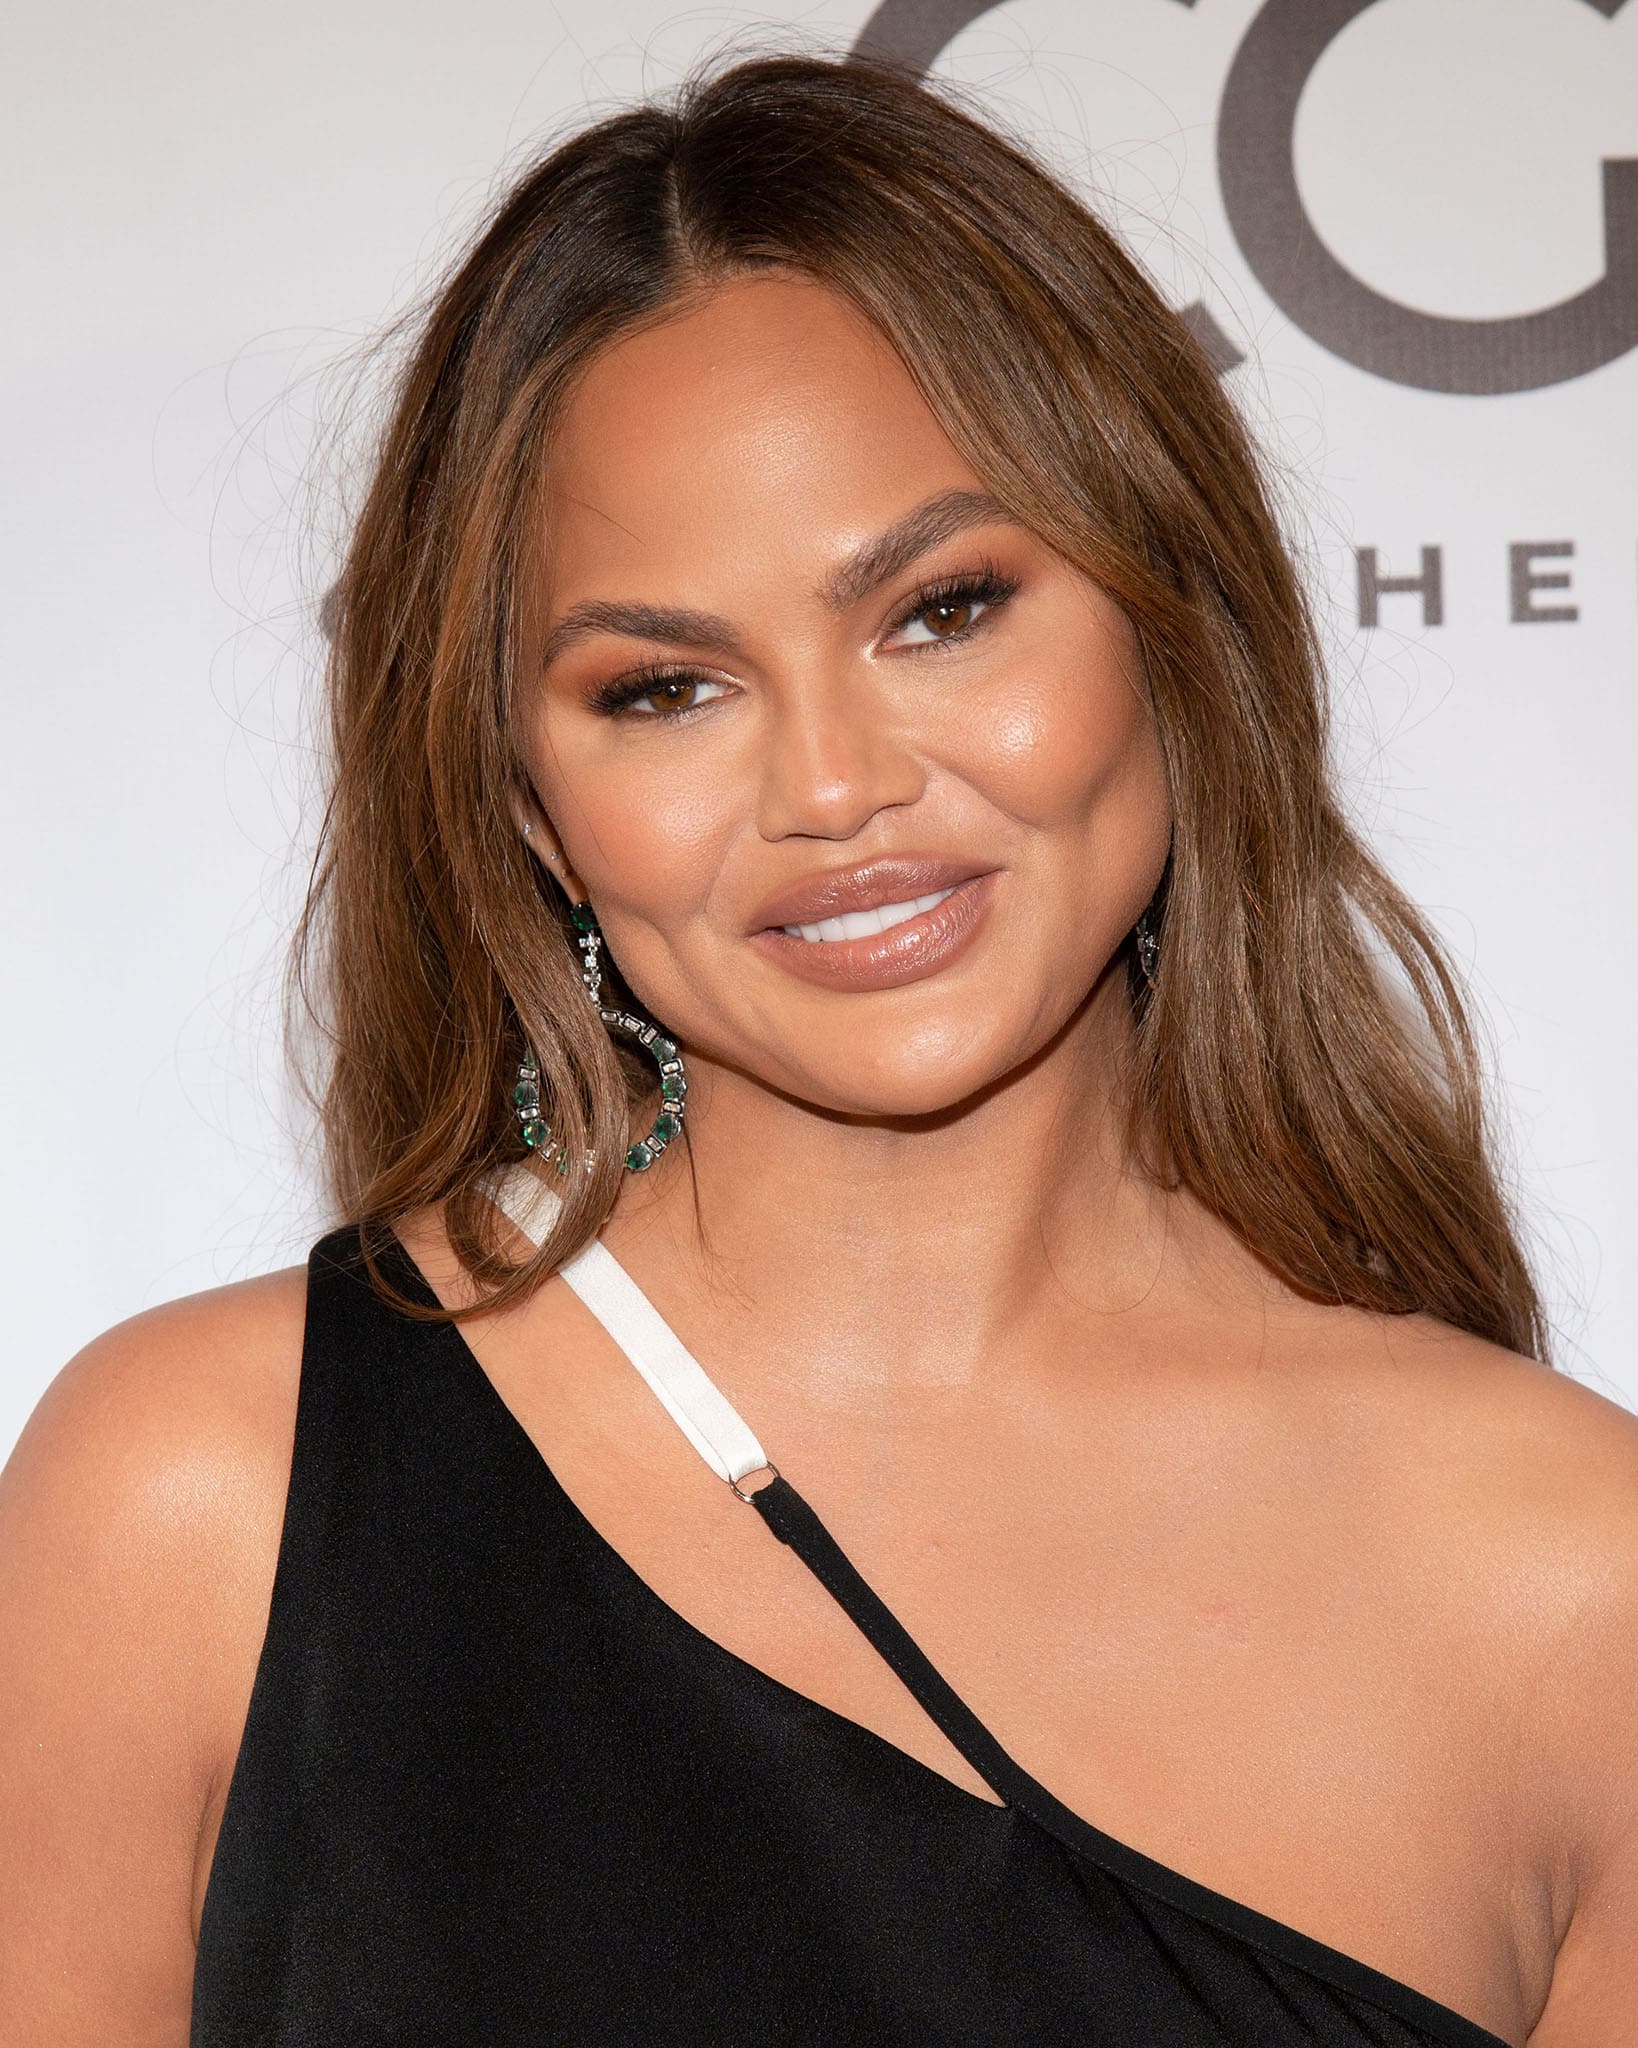 Chrissy Teigen styles her tresses in beach waves and glams up with neutral makeup